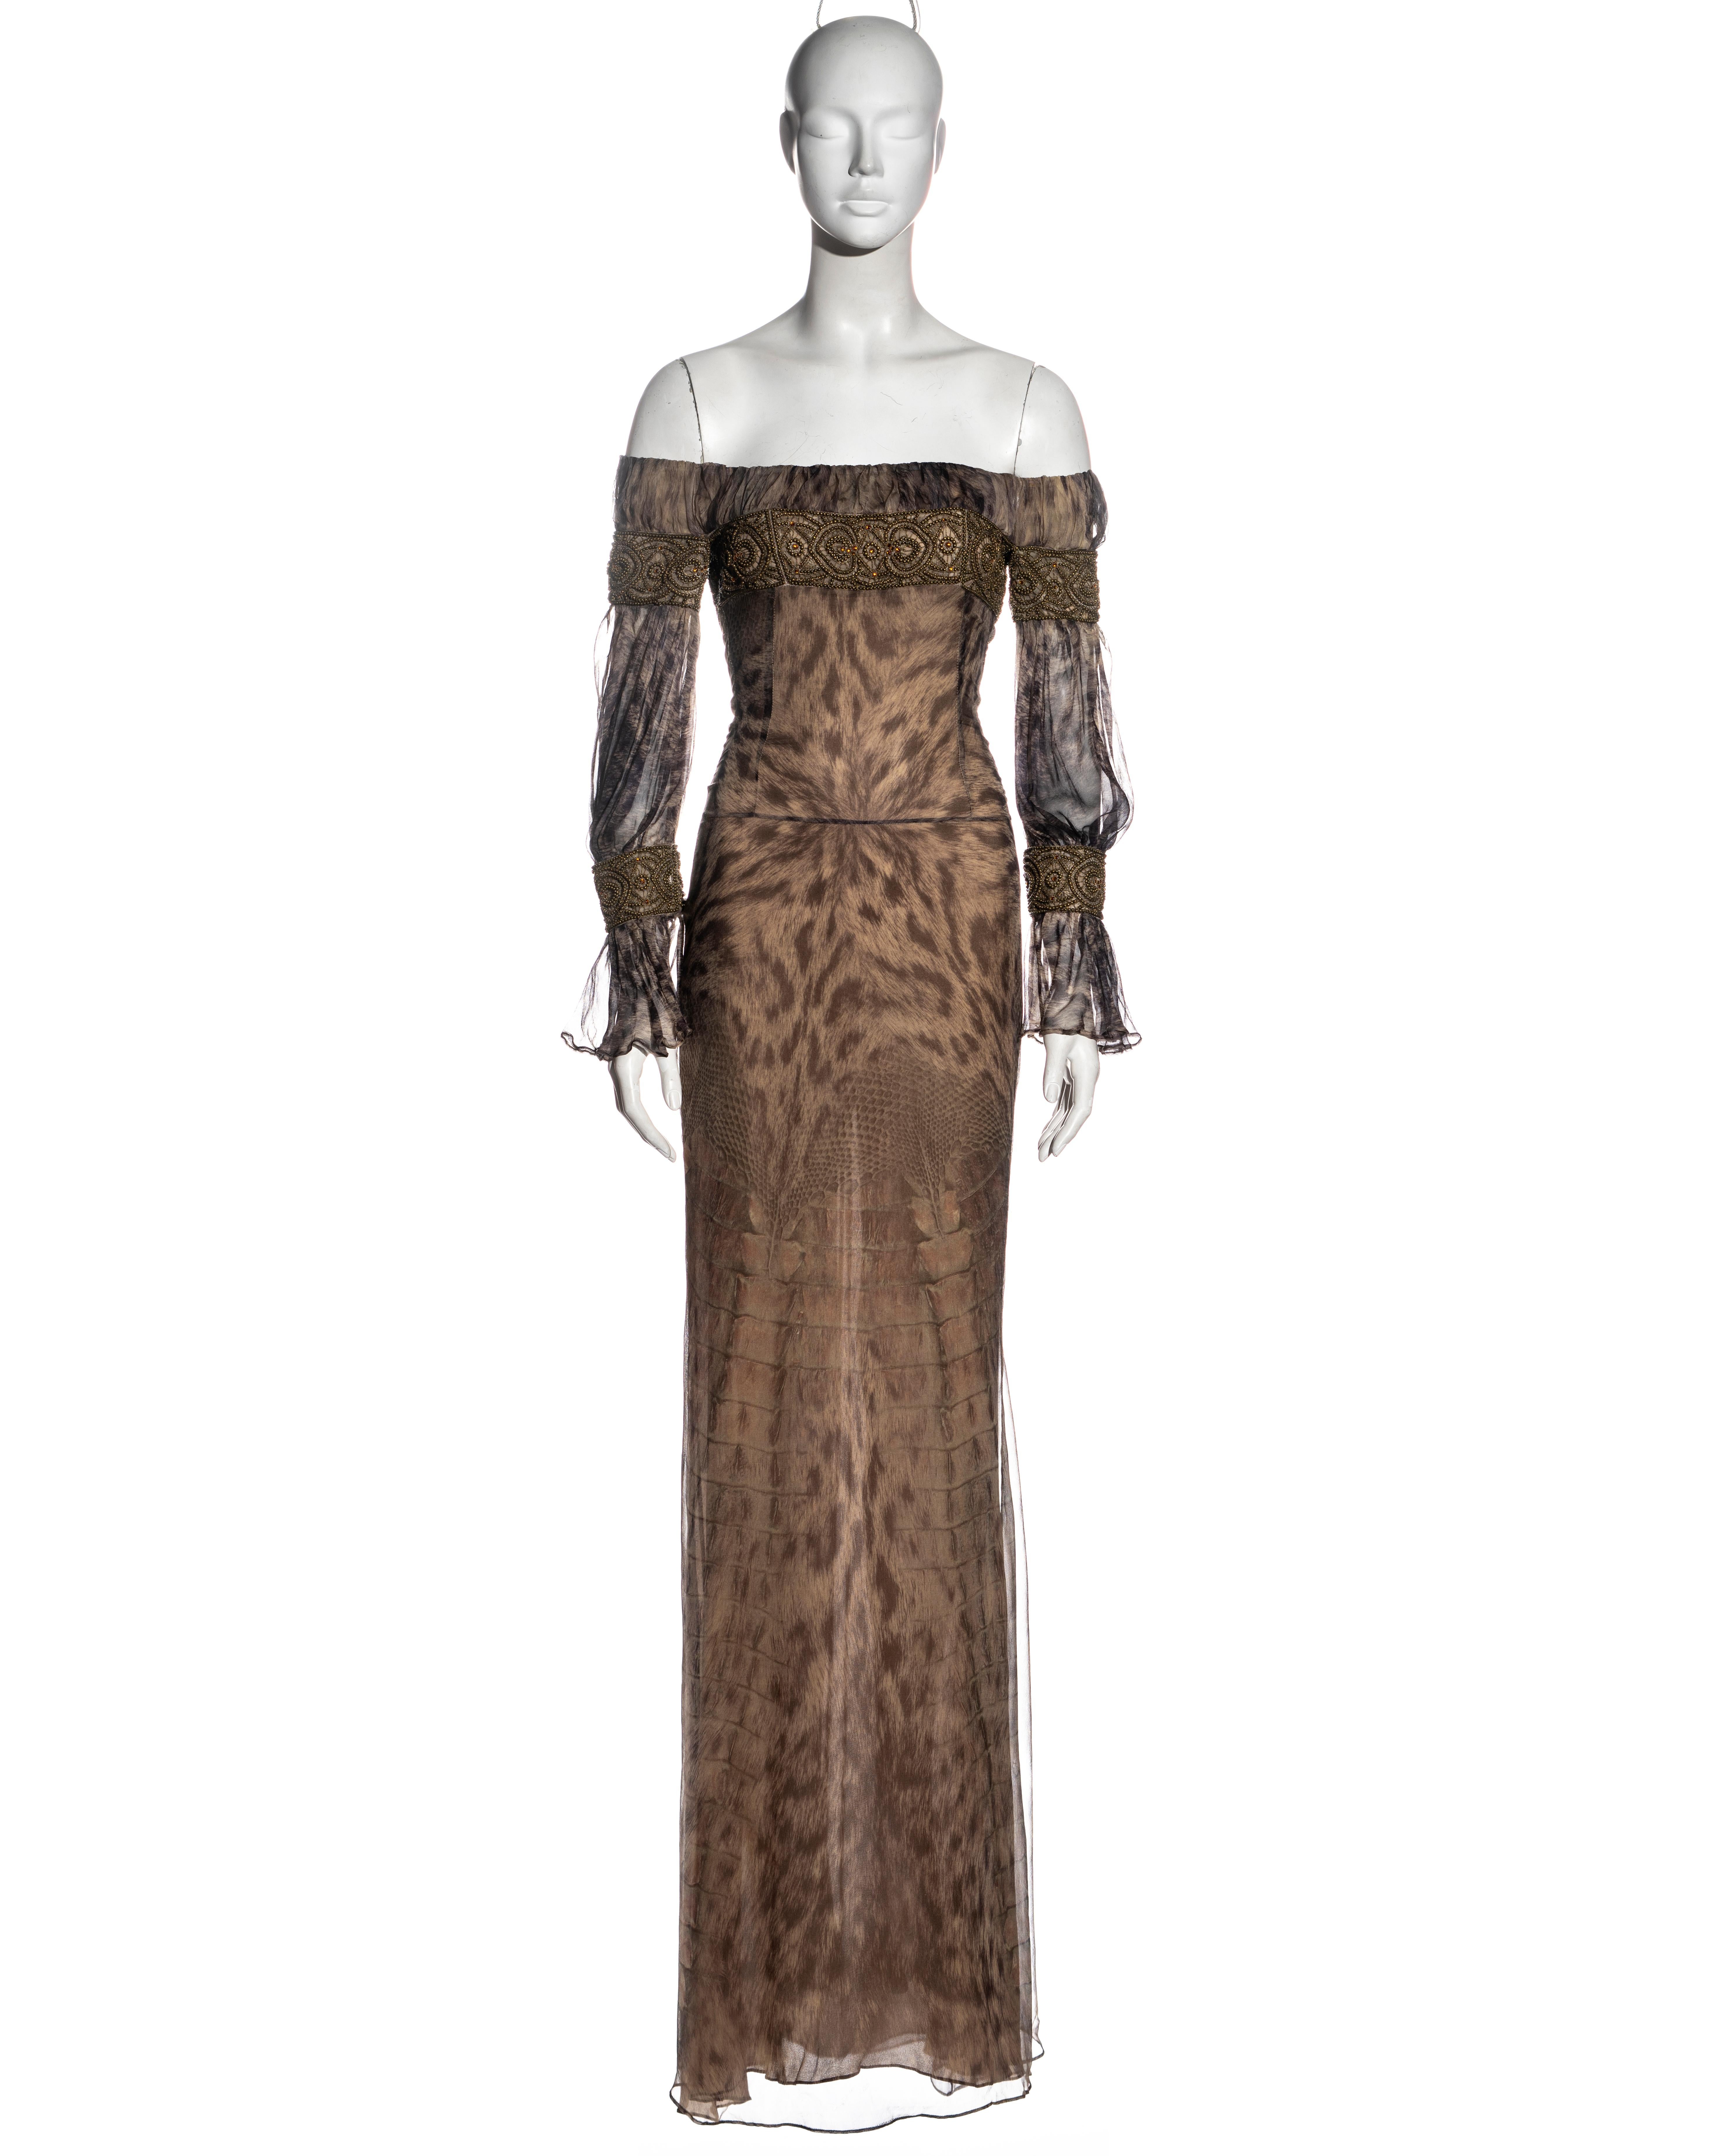 ▪ Alexander McQueen silk evening dress
▪ Brass beaded bands with amber stones 
▪ Long full sleeves gathered at the top and cuffs 
▪ Montage animal print 
▪ Floor-length skirt 
▪ IT 40 - FR 36 - UK 8 - US 4
▪ 'Pantheon as Lecum', Fall-Winter 2004
▪